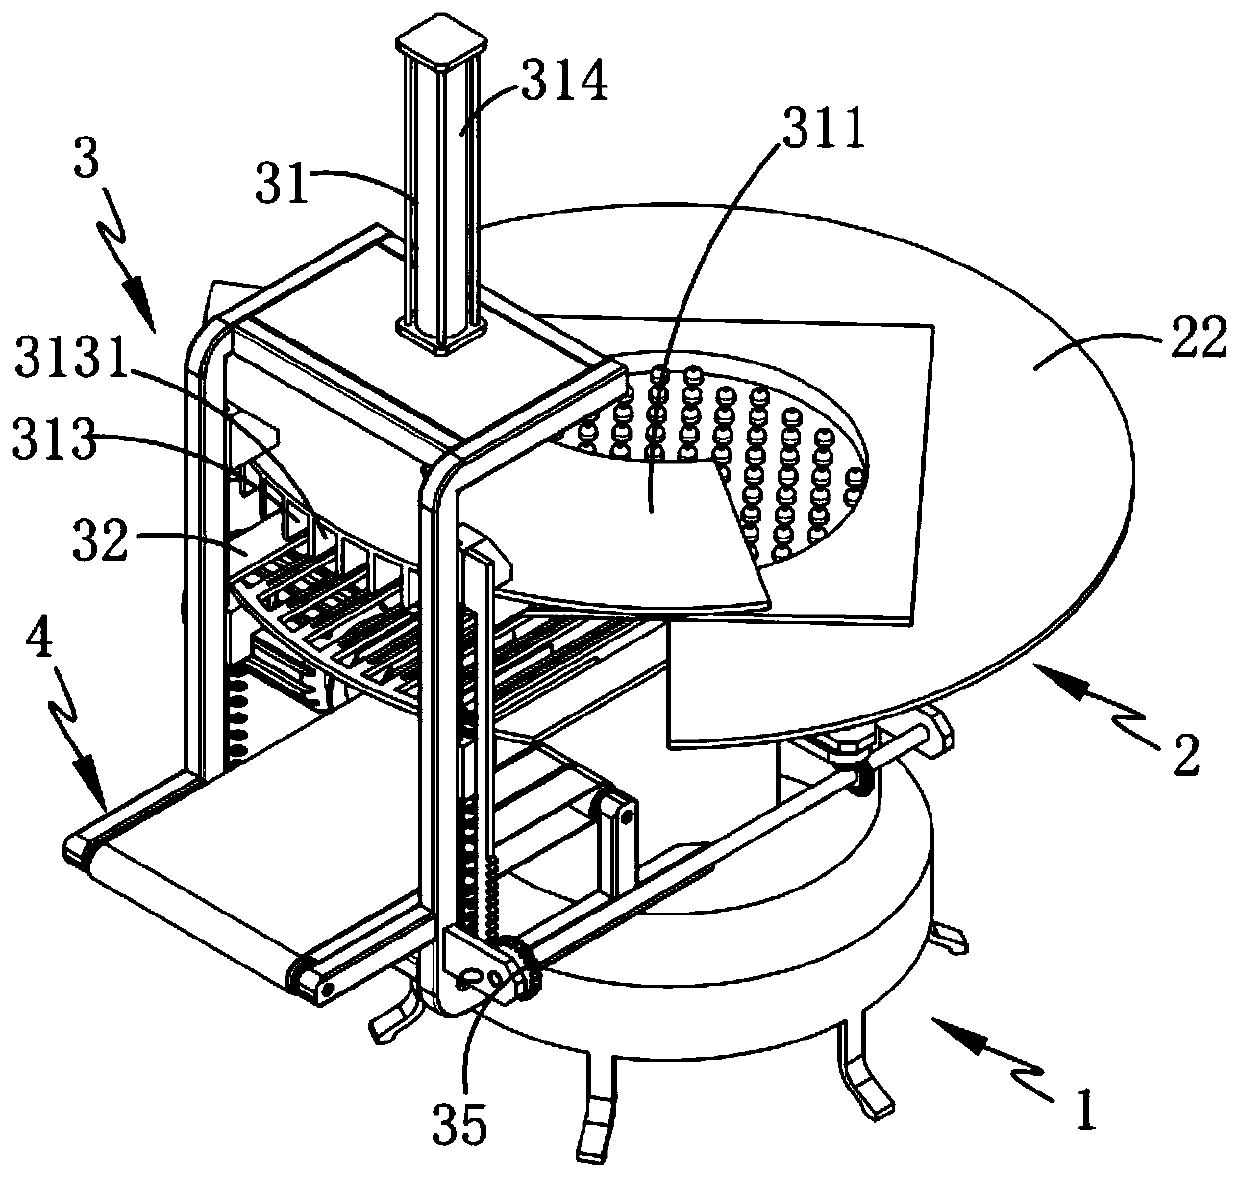 A composite desktop production device for plastic furniture and its process